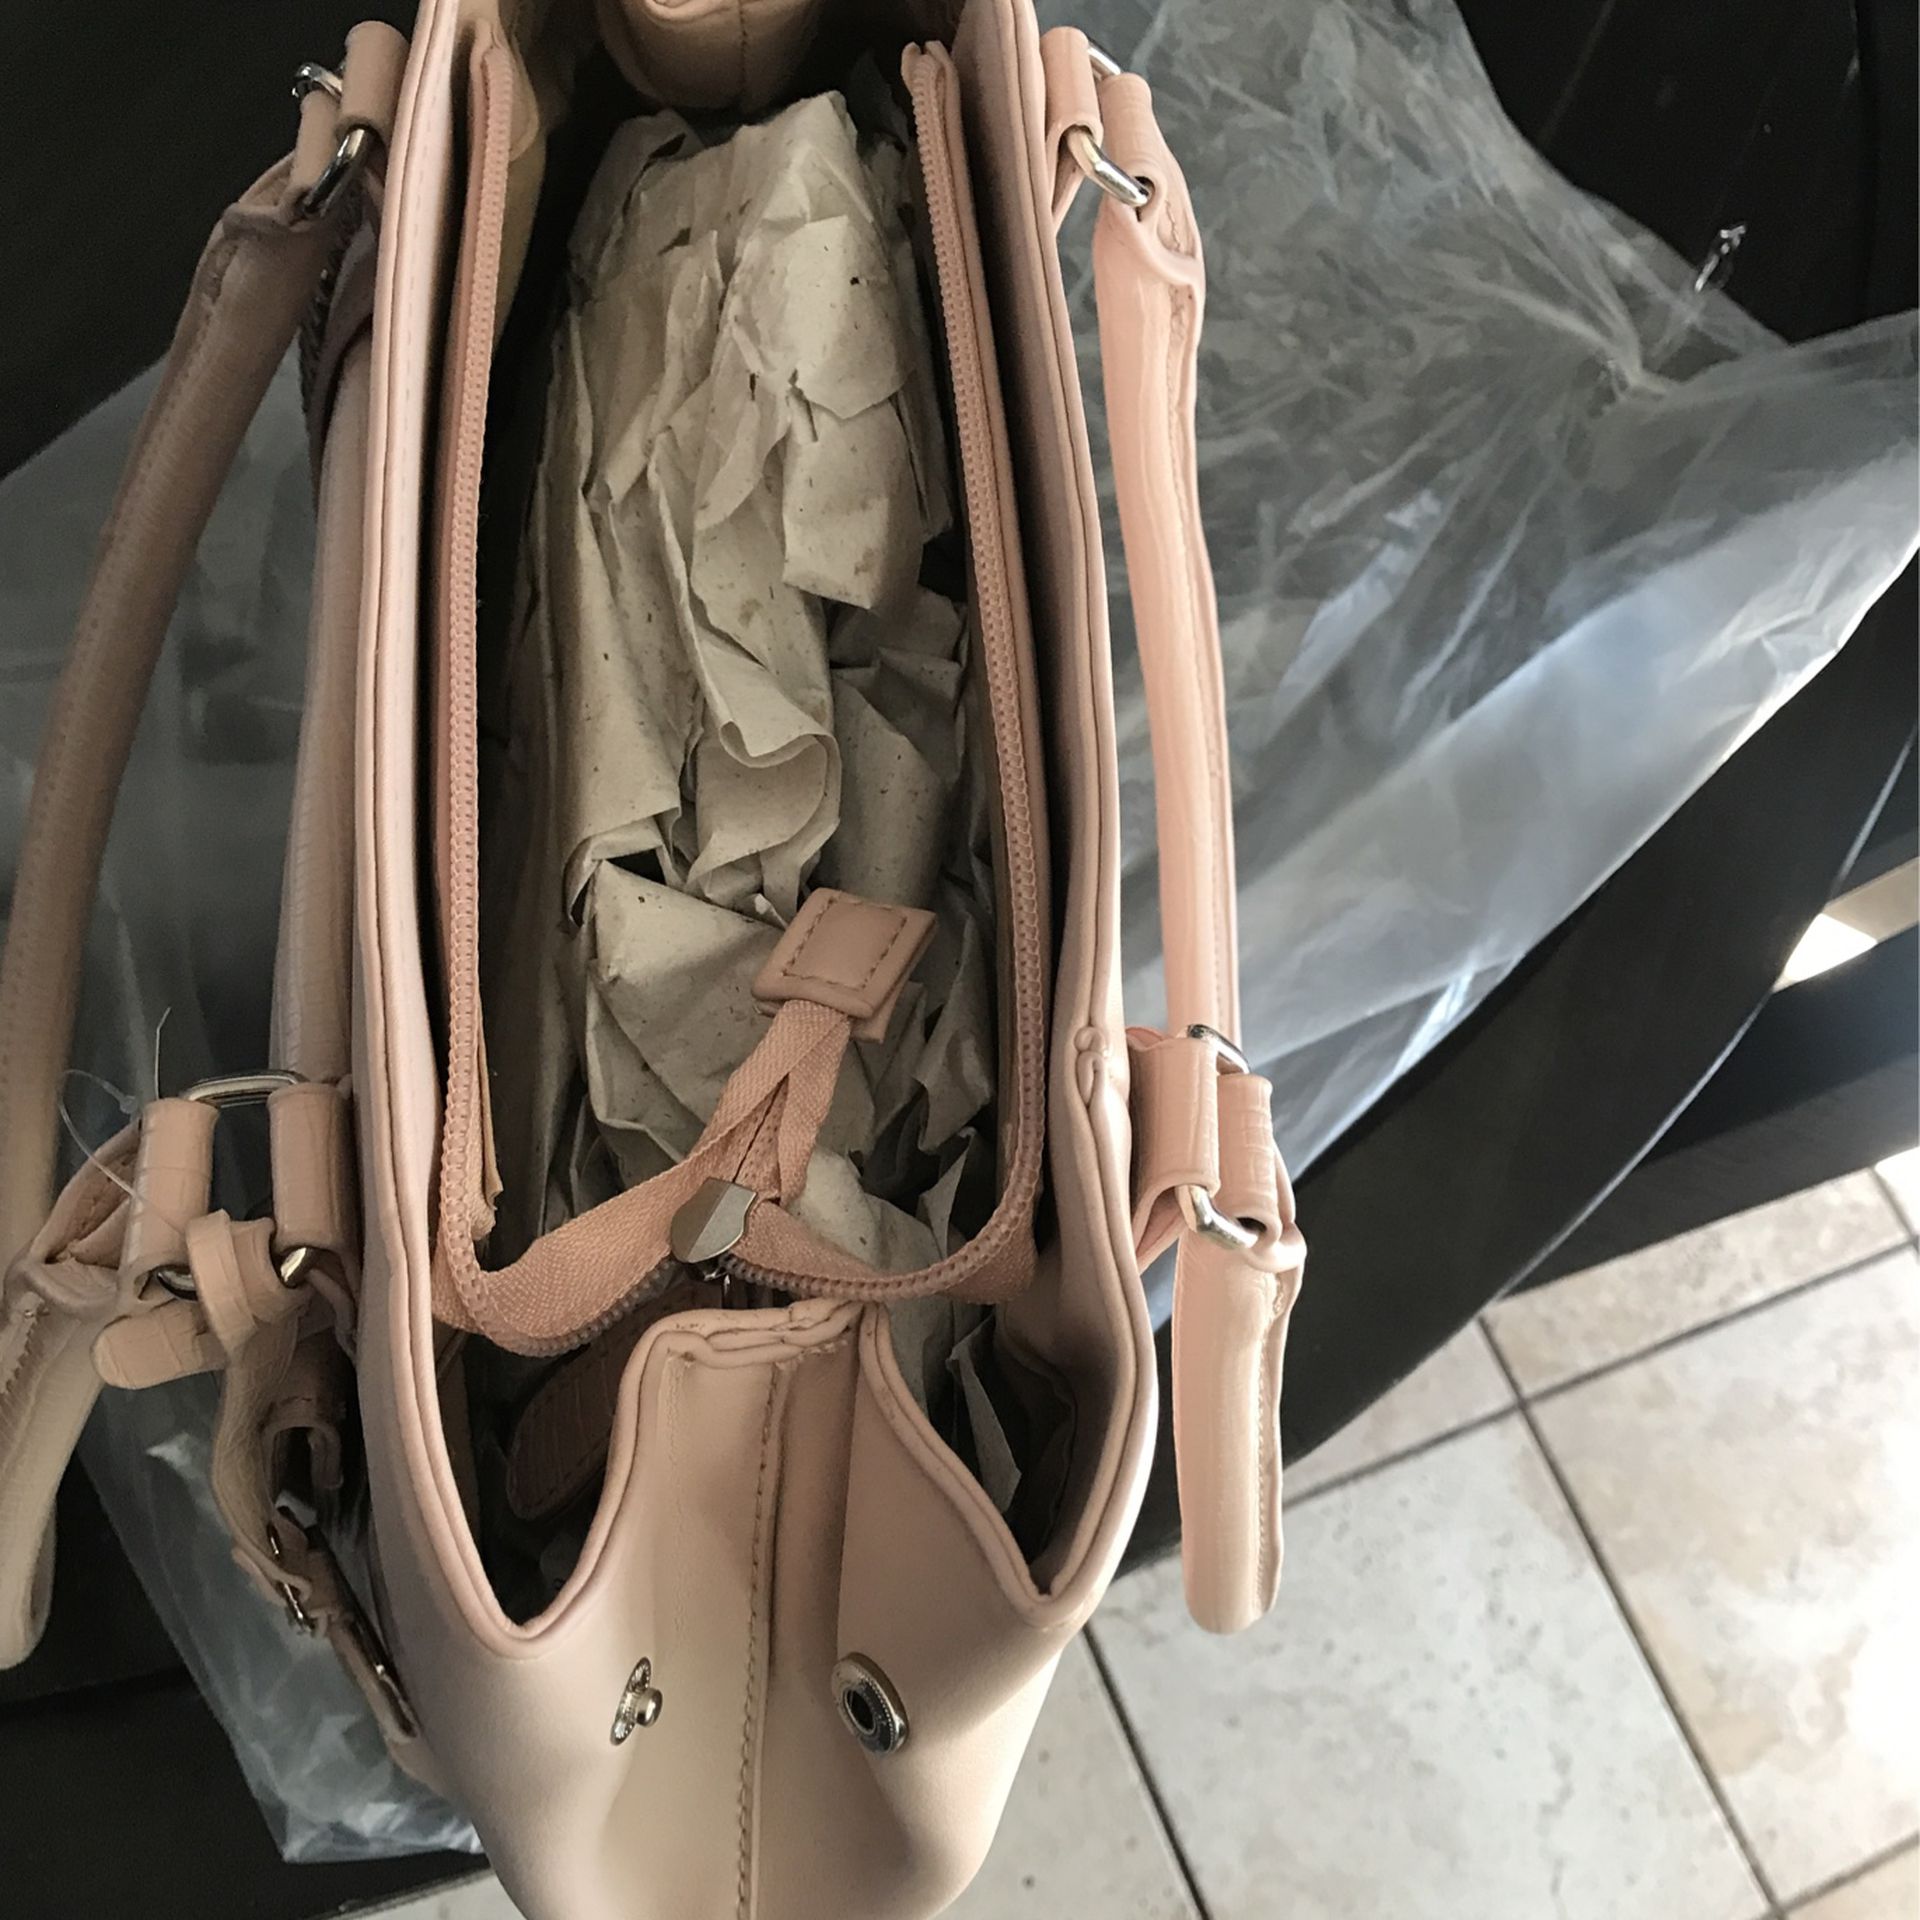 Loungefly Doug Backpack for Sale in Tustin, CA - OfferUp